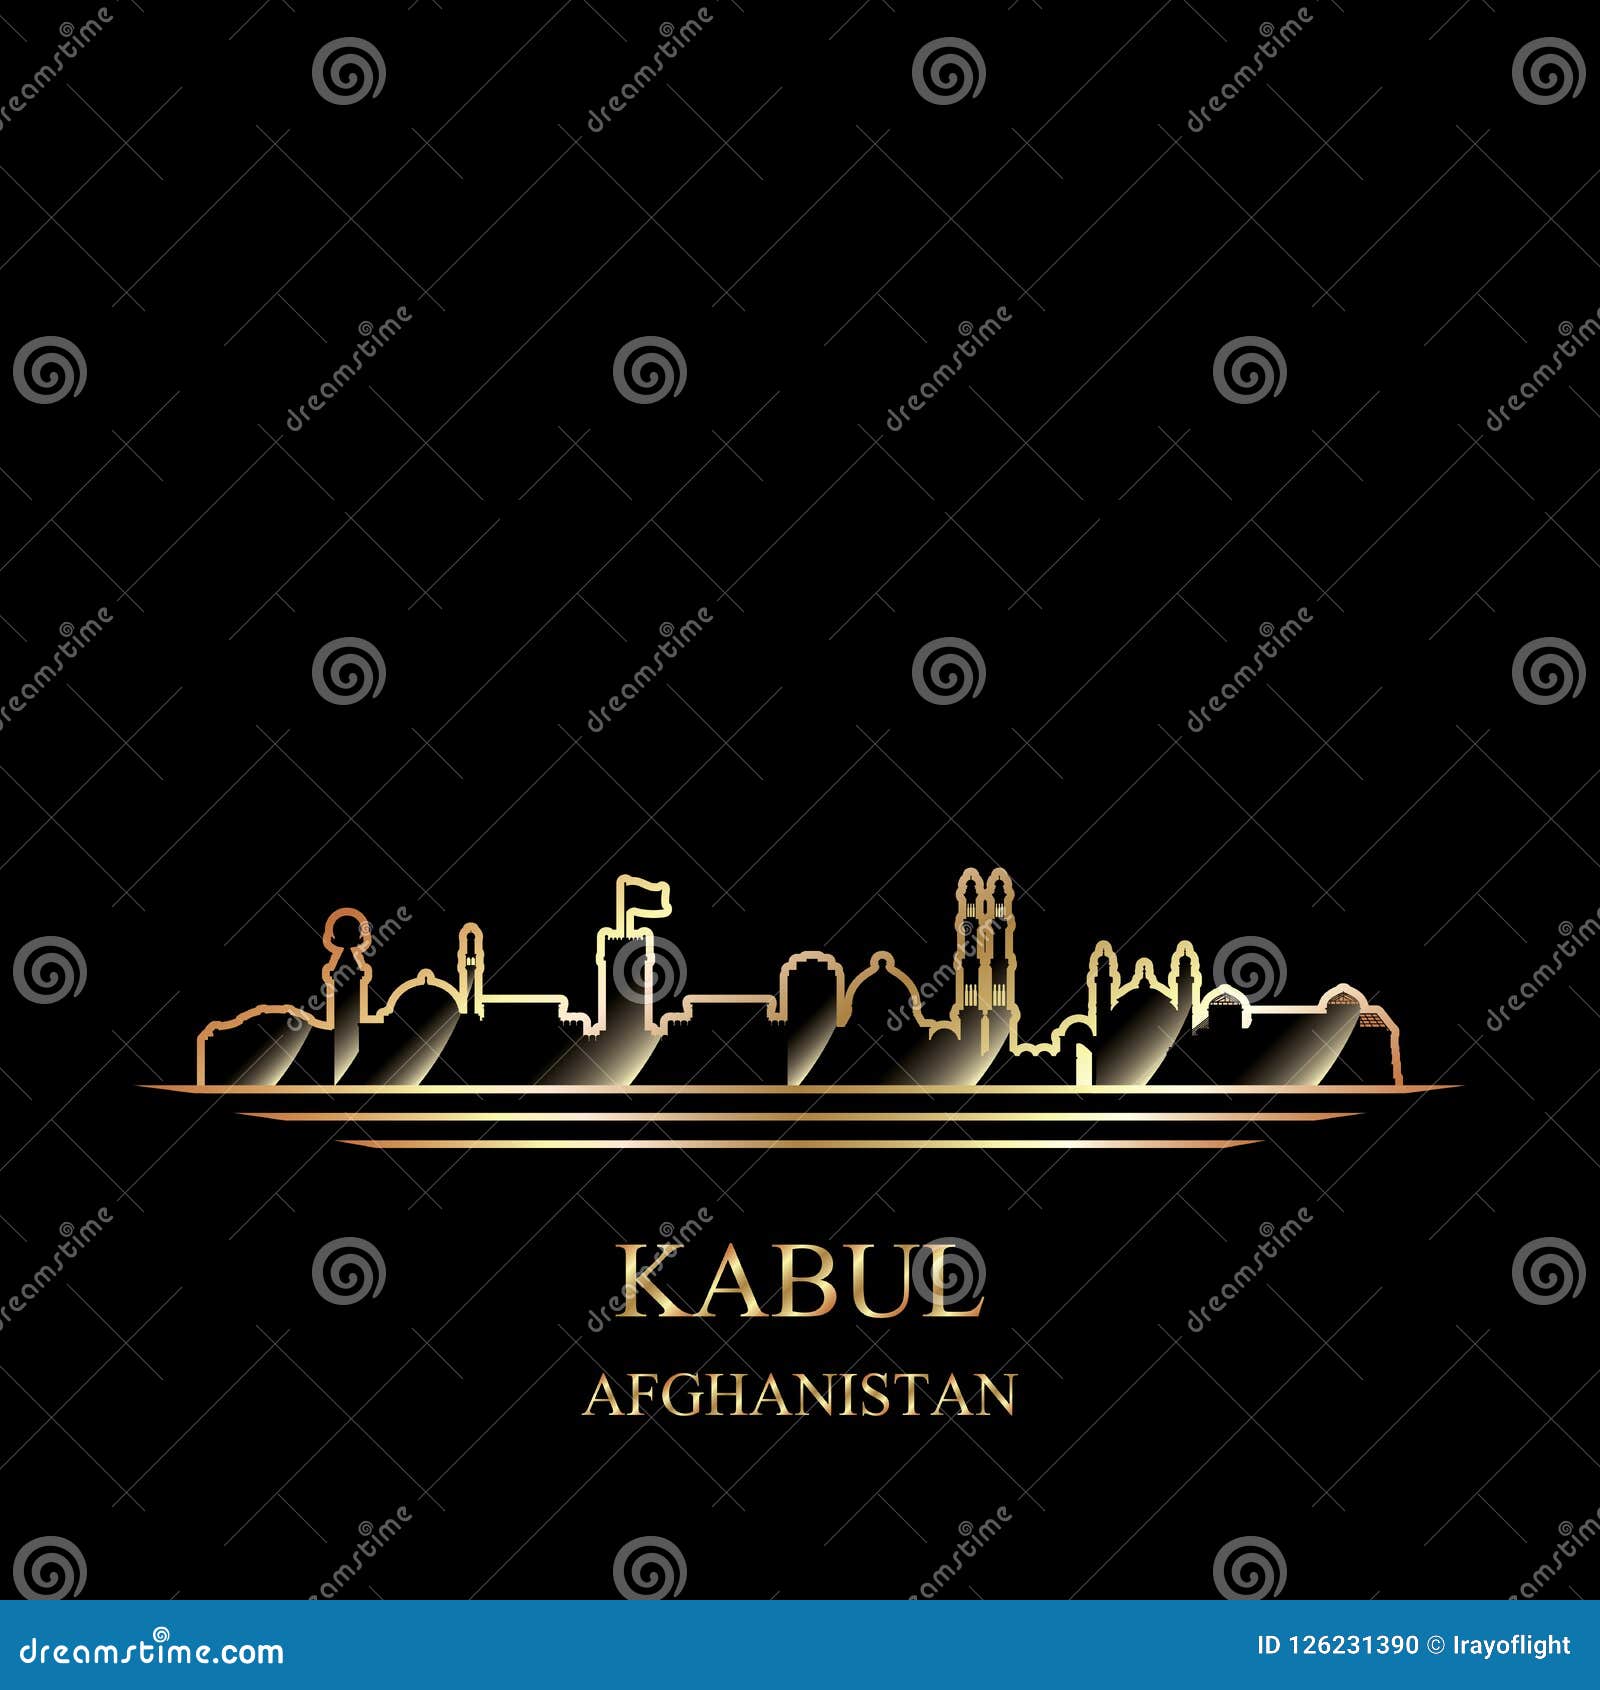 gold silhouette of kabul on black background